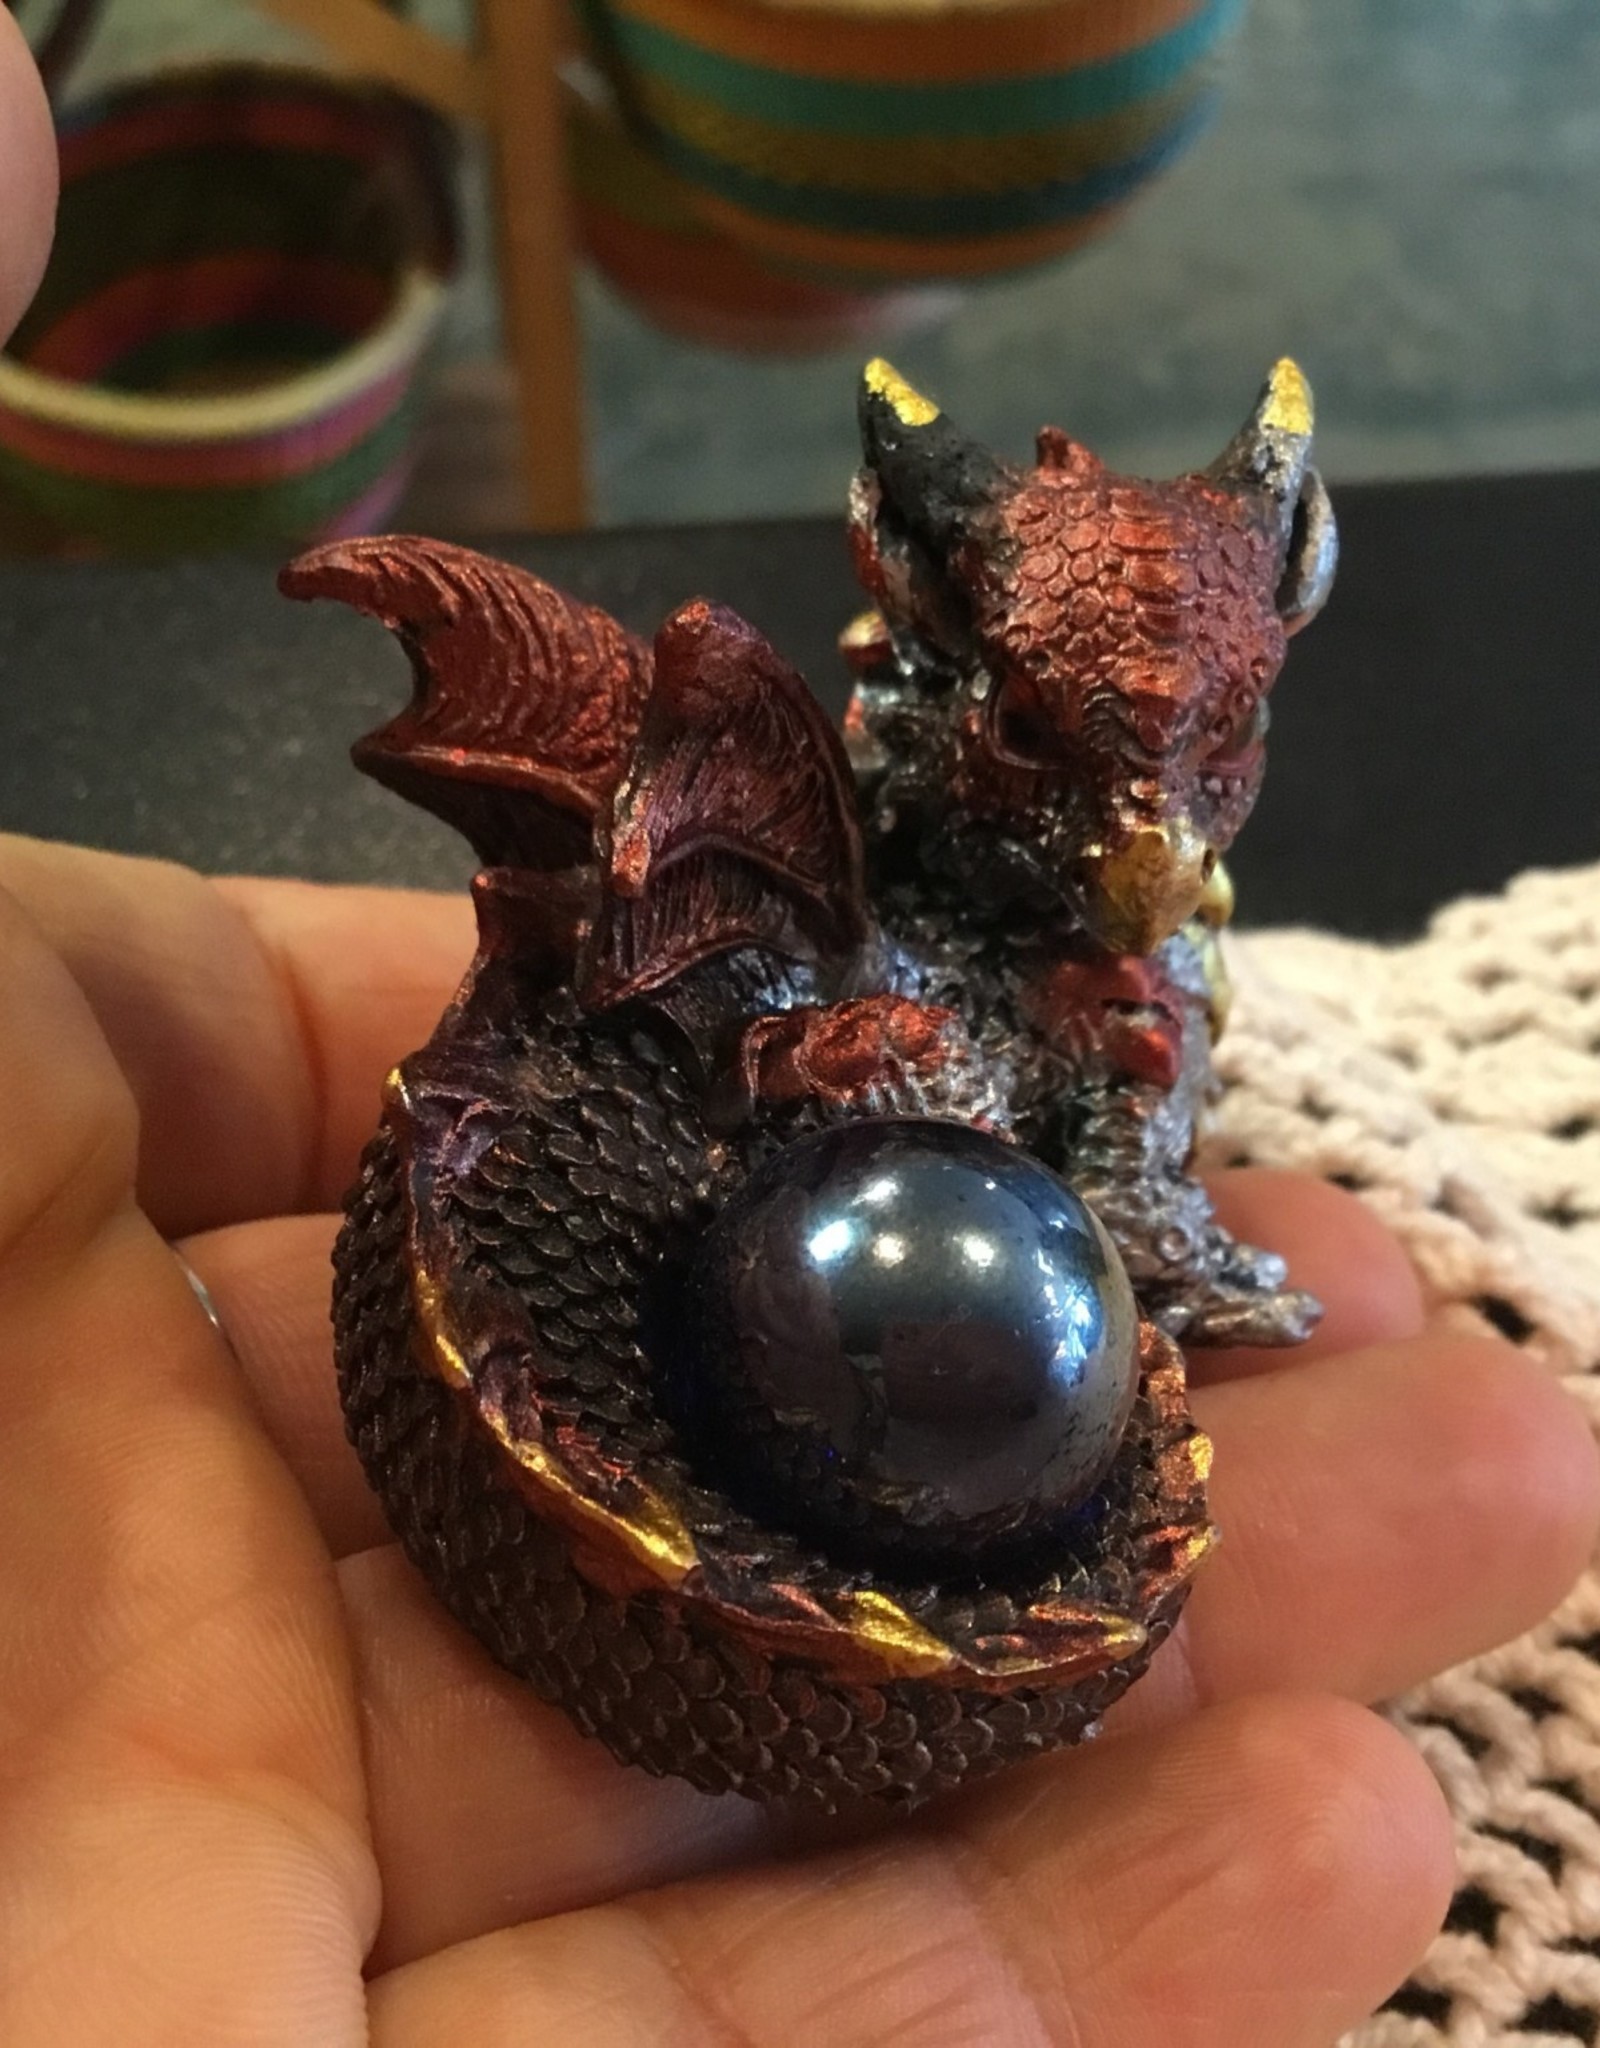 Iridescent Dragon Hatchlings - with marble 2''